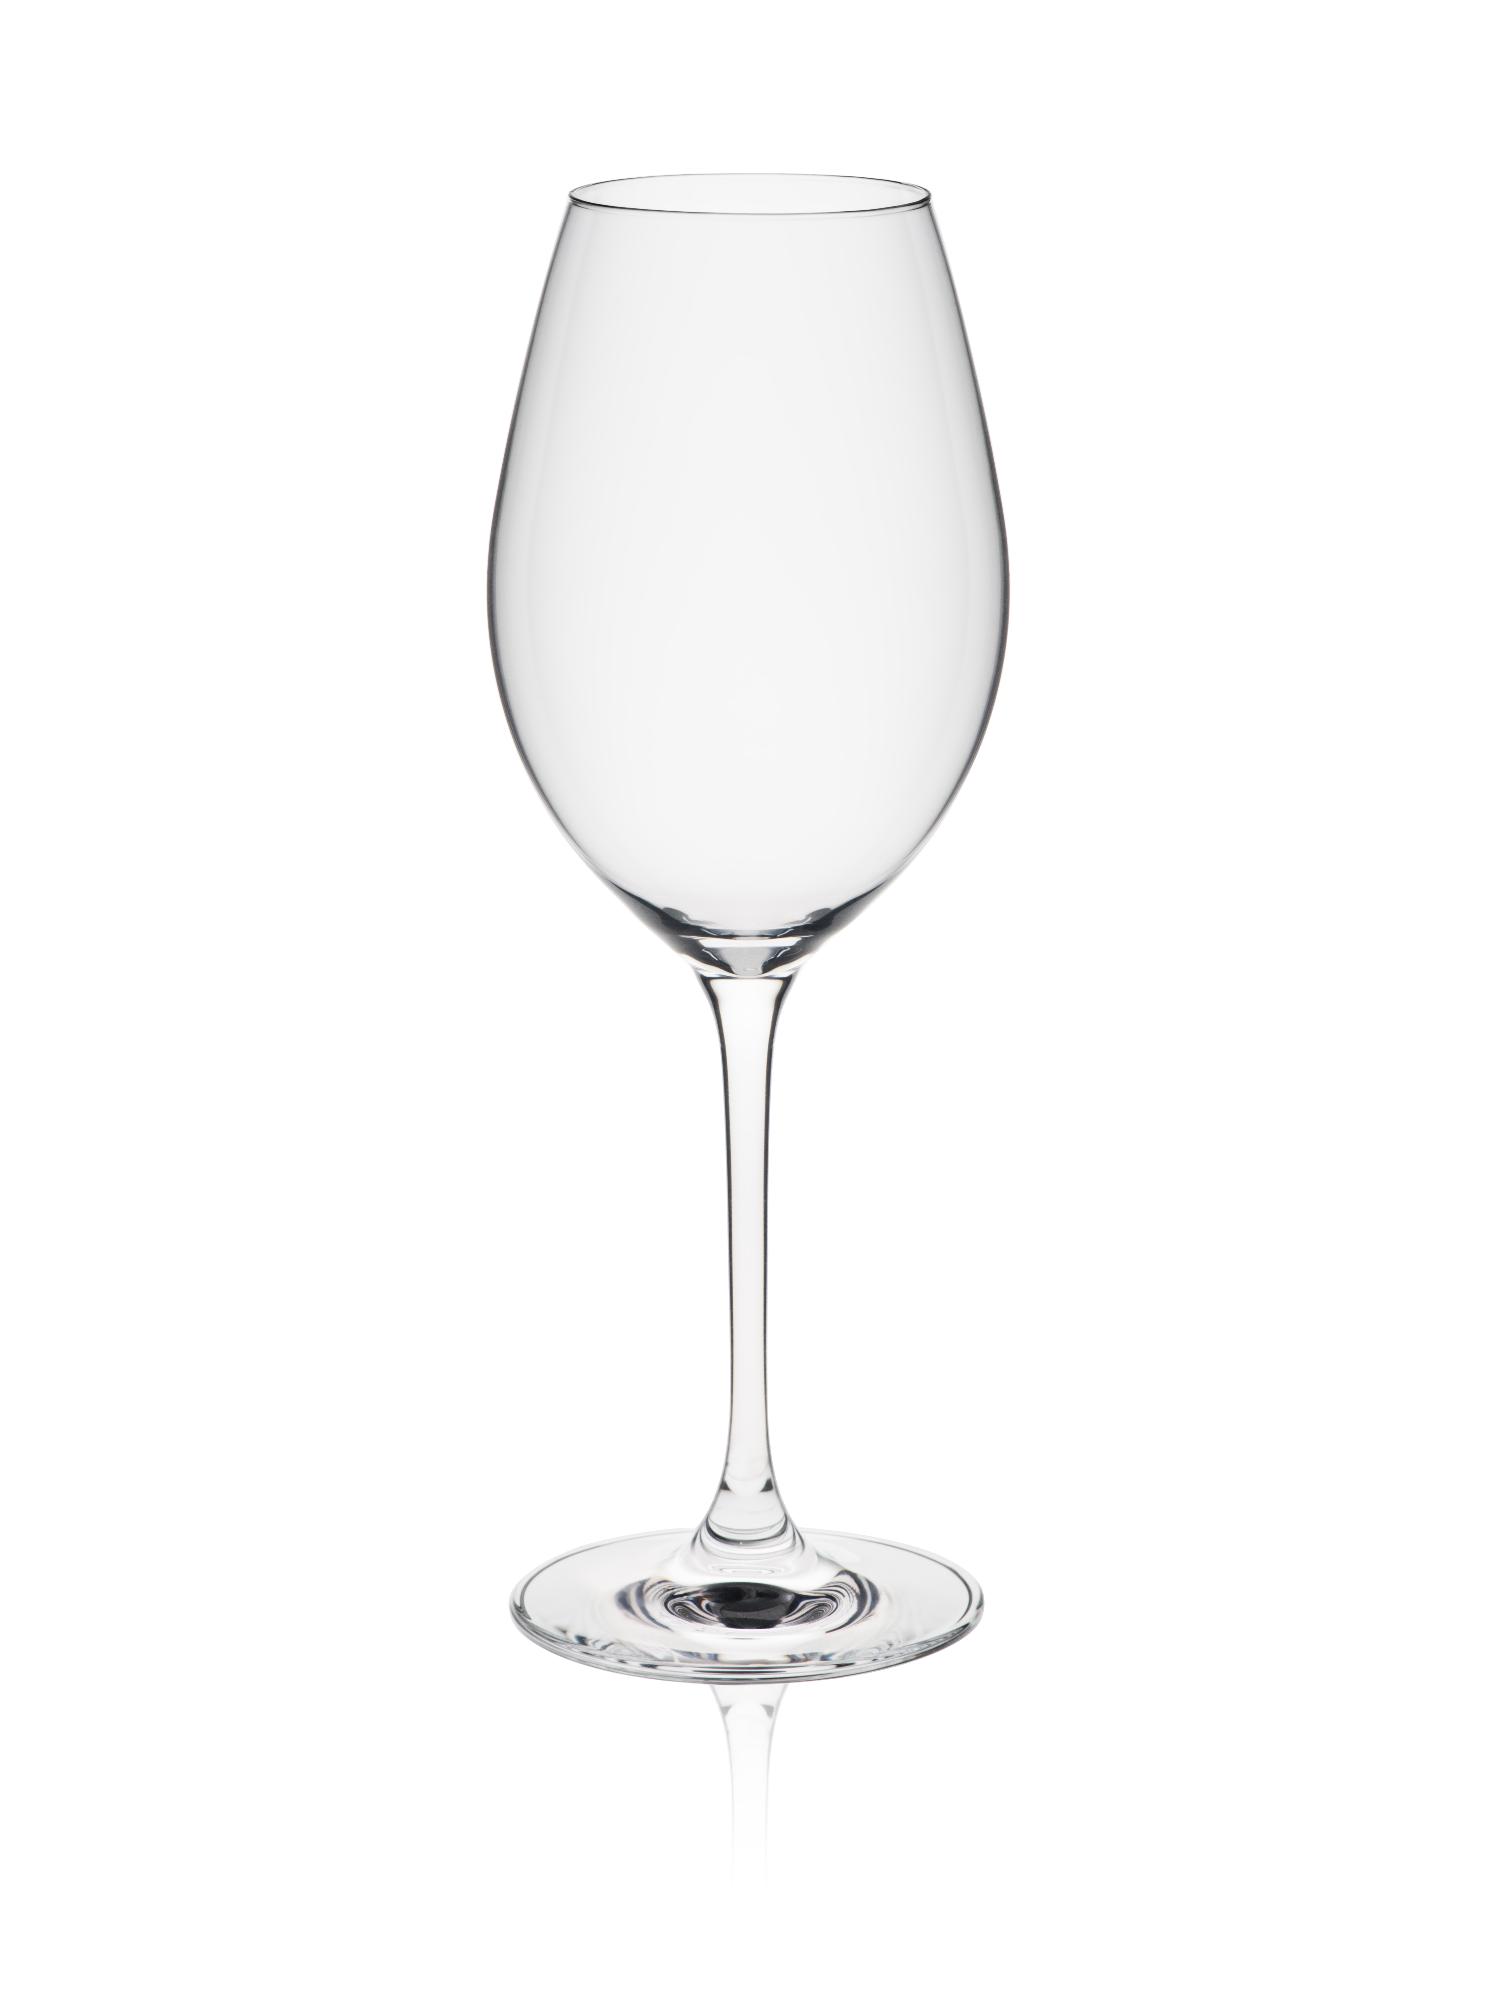 Le Vin Riesling glass, 360ml